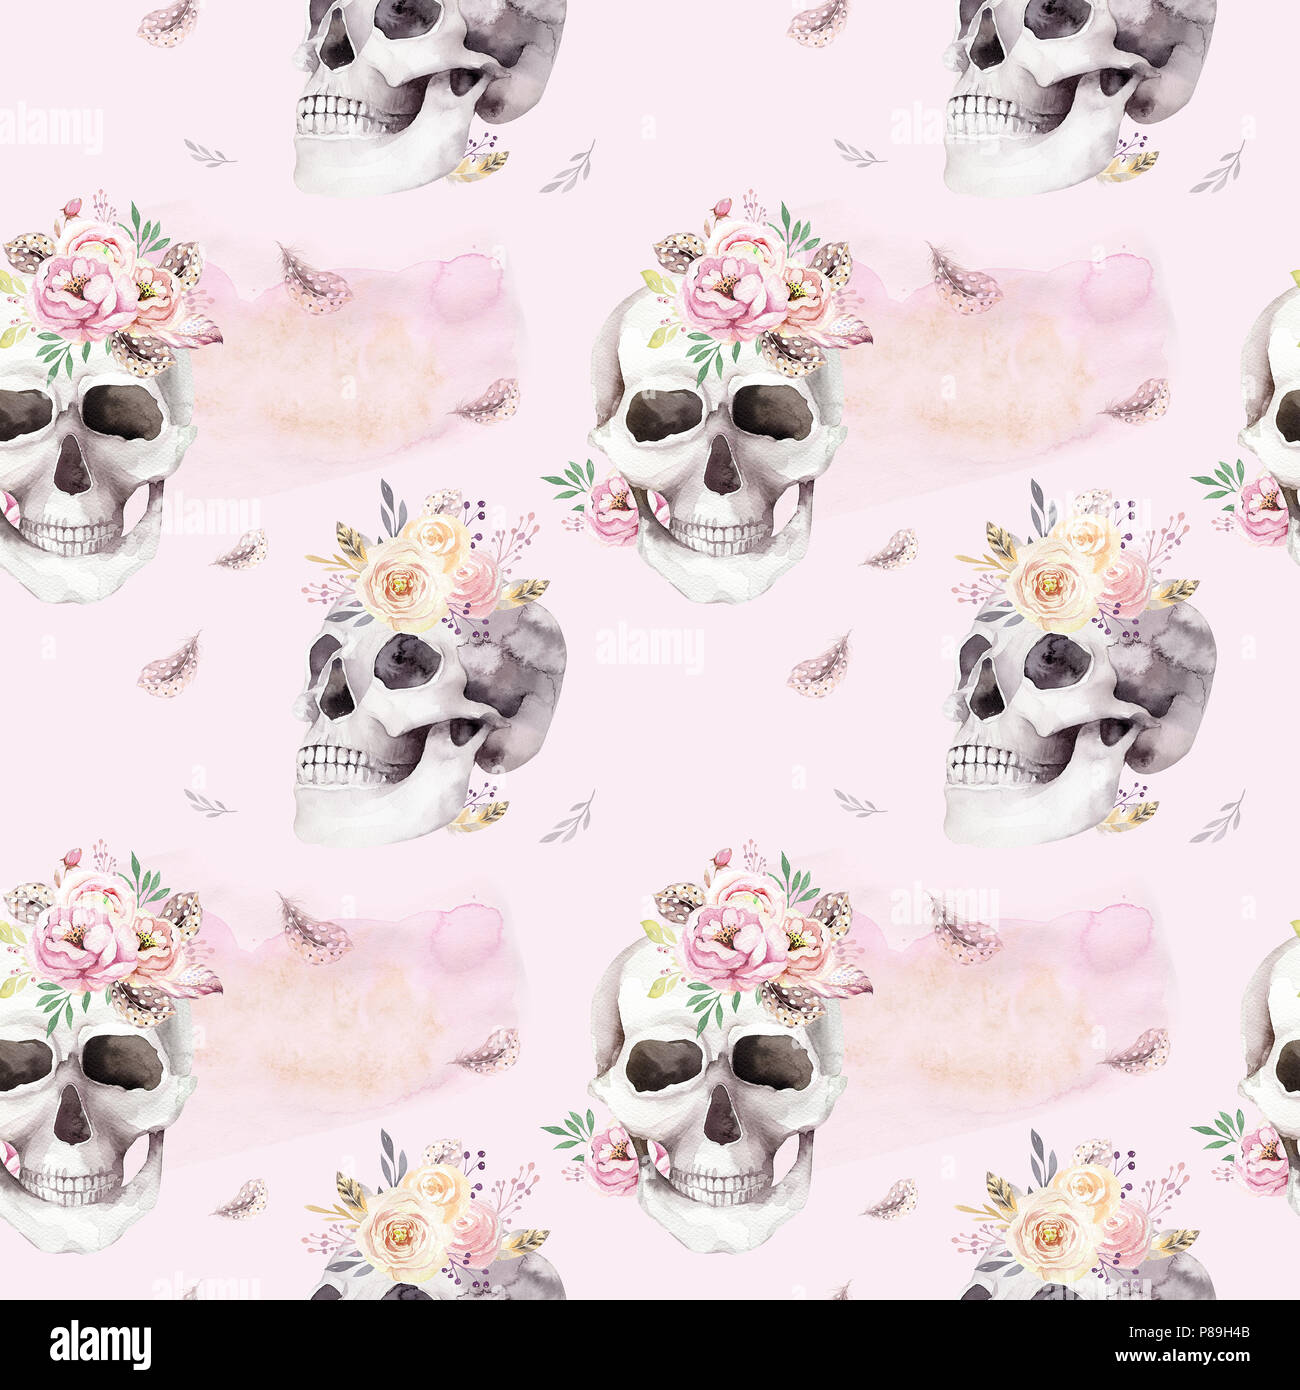 Black and White Floral Wallpaper Peel and Stick Sugar Skull Wallpaper White  Hibiscus Floral Wallpaper Skull Goth Wall Decor 173x23622 Covering 30  sqft Buy Online at Best Price in UAE  Amazonae